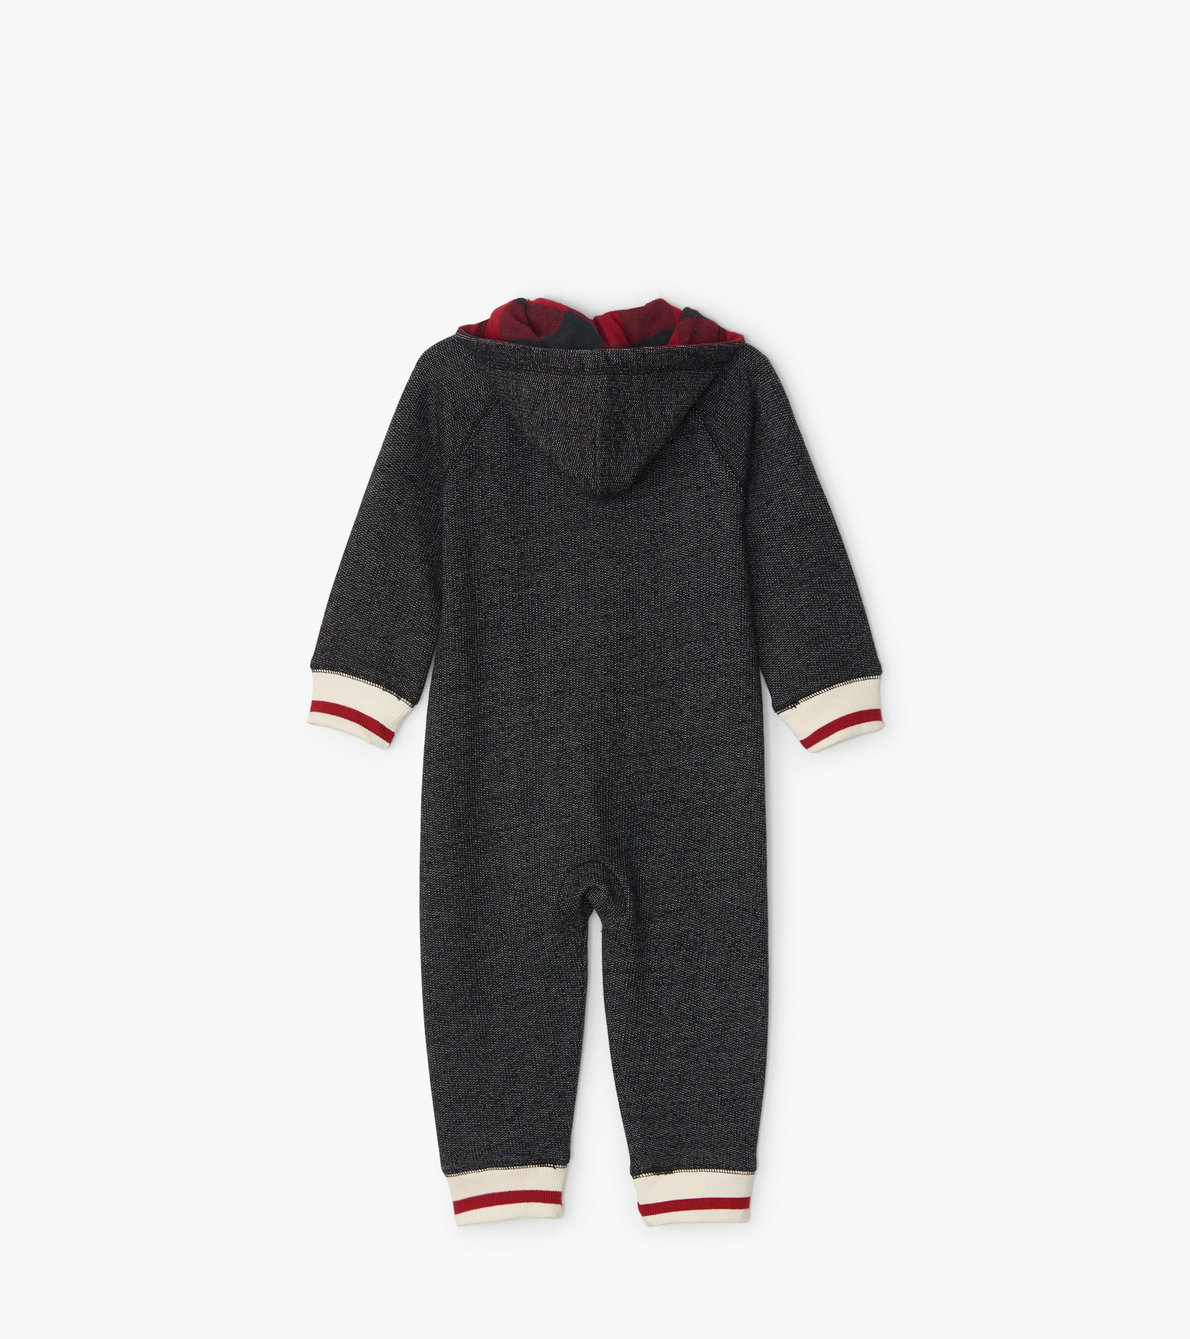 View larger image of Buffalo Plaid Moose Baby Heritage Hooded Romper